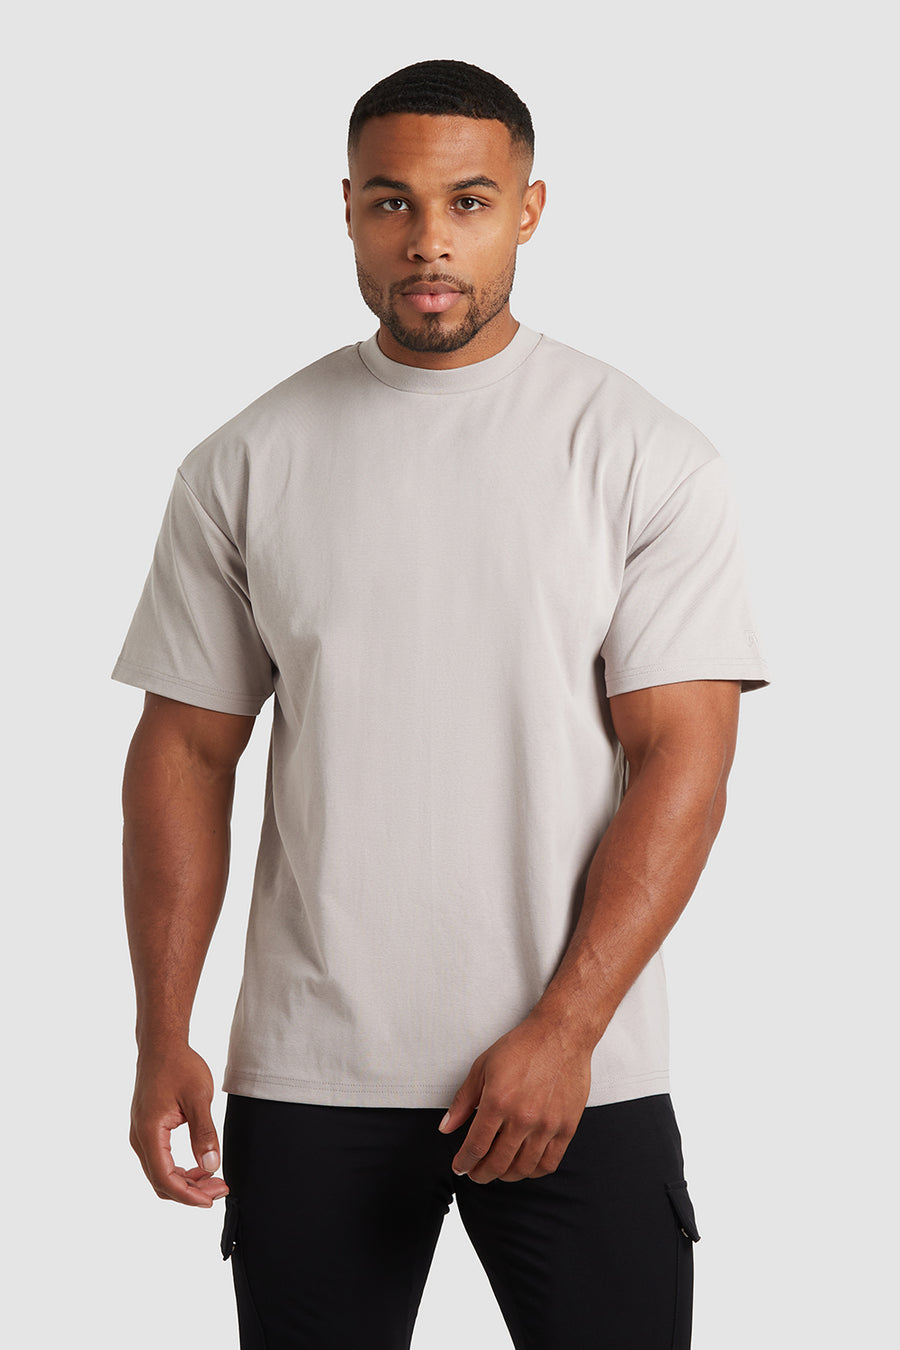 Boxy Fit T-Shirt in Putty - TAILORED ATHLETE - USA